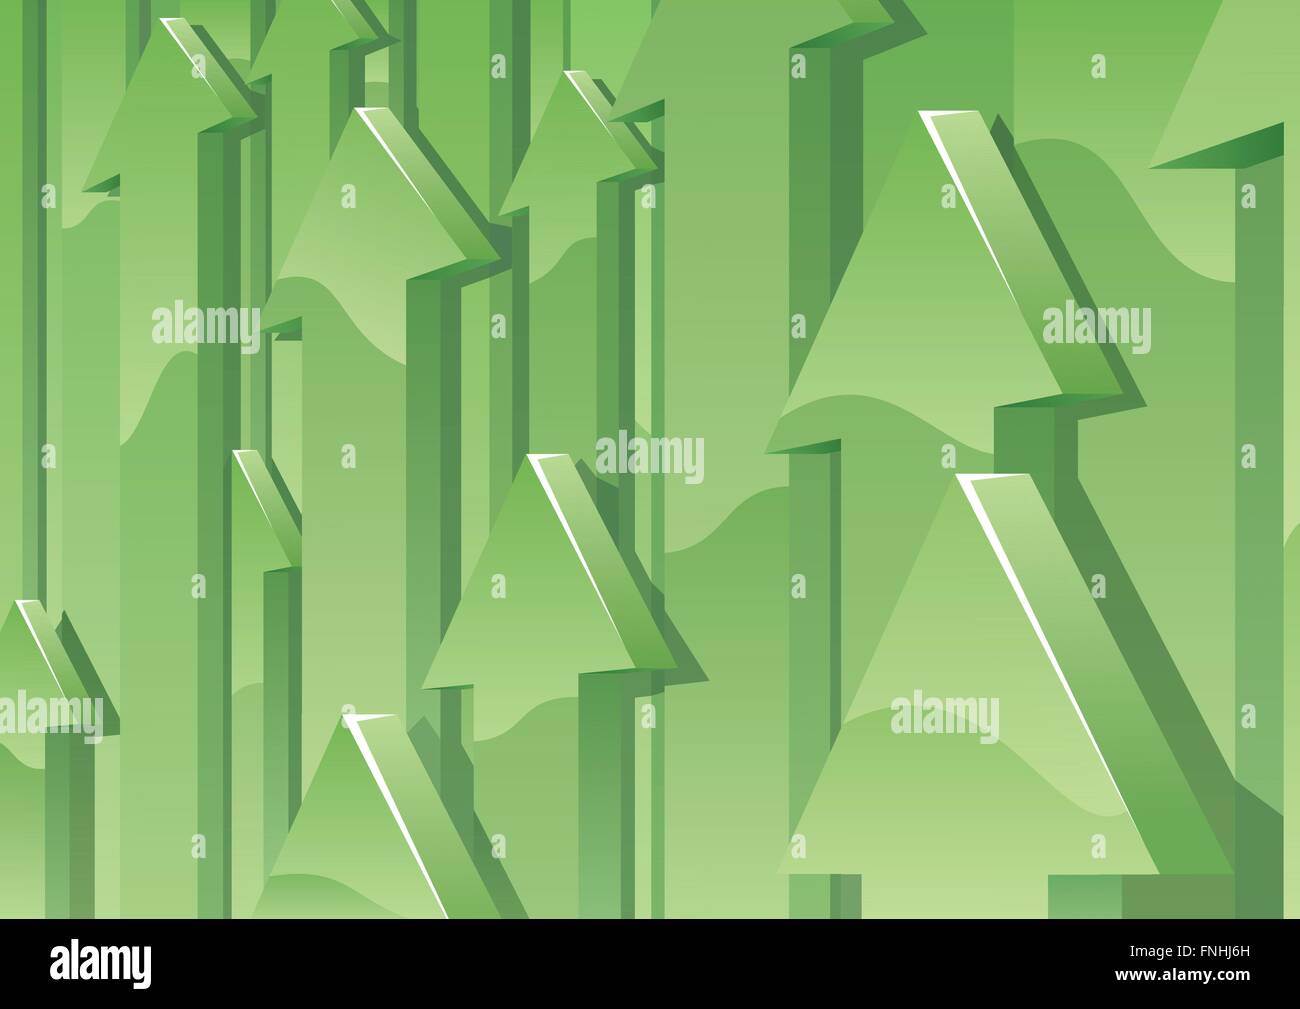 Abstract background with green 3D arrows pointing up. No transparency used. Basic (linear) gradients used. Stock Vector